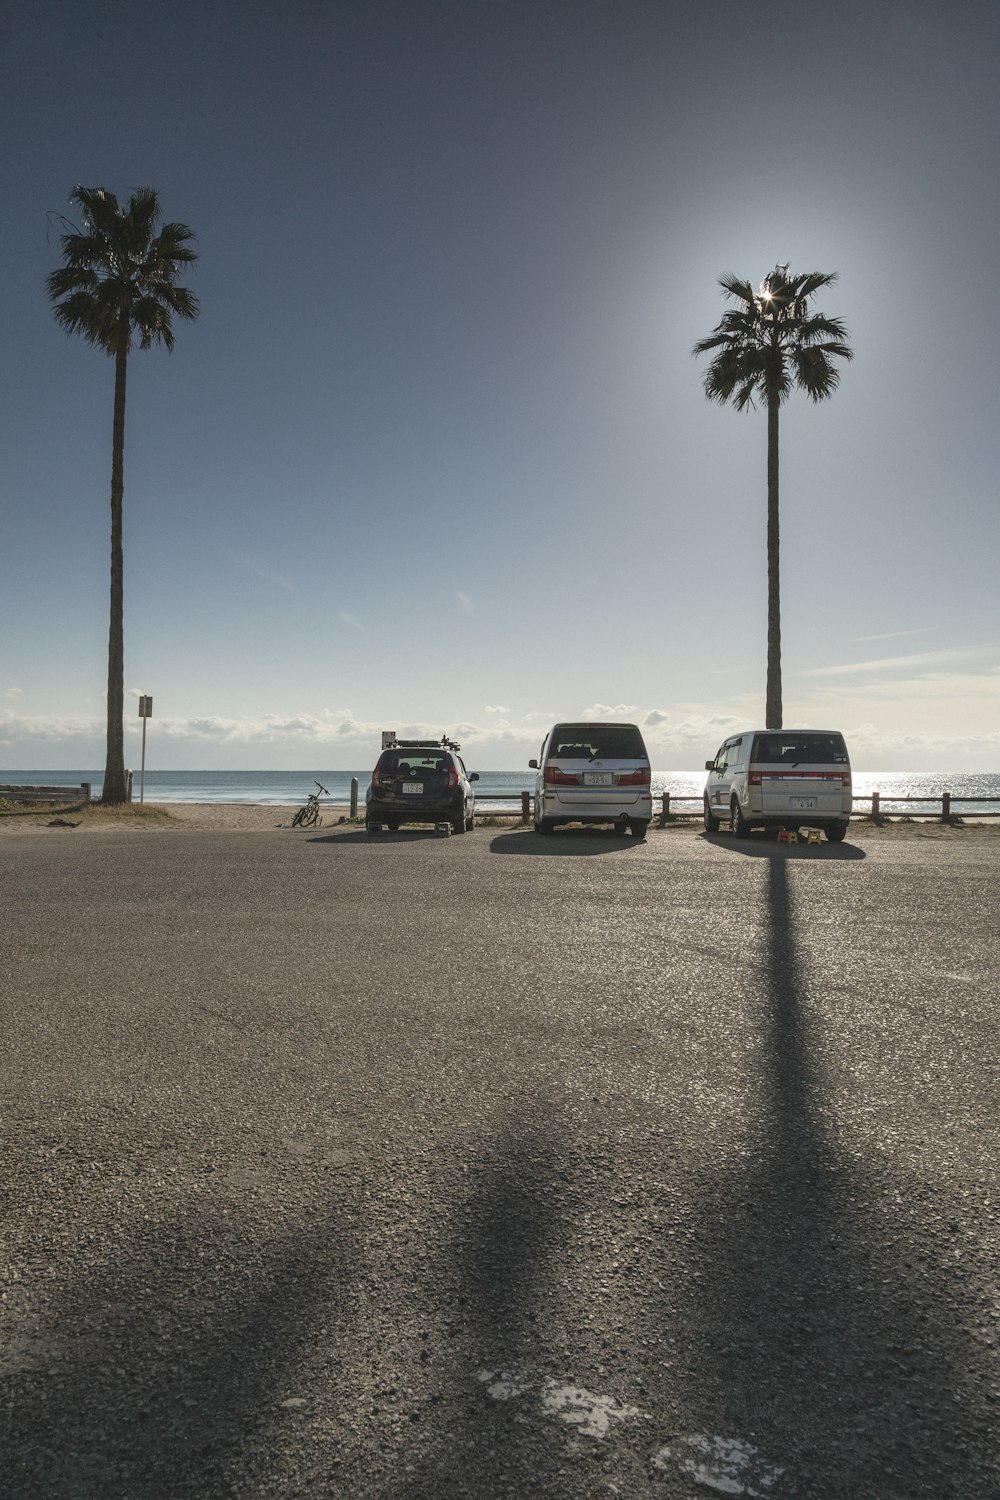 three vans parked in a parking lot next to palm trees